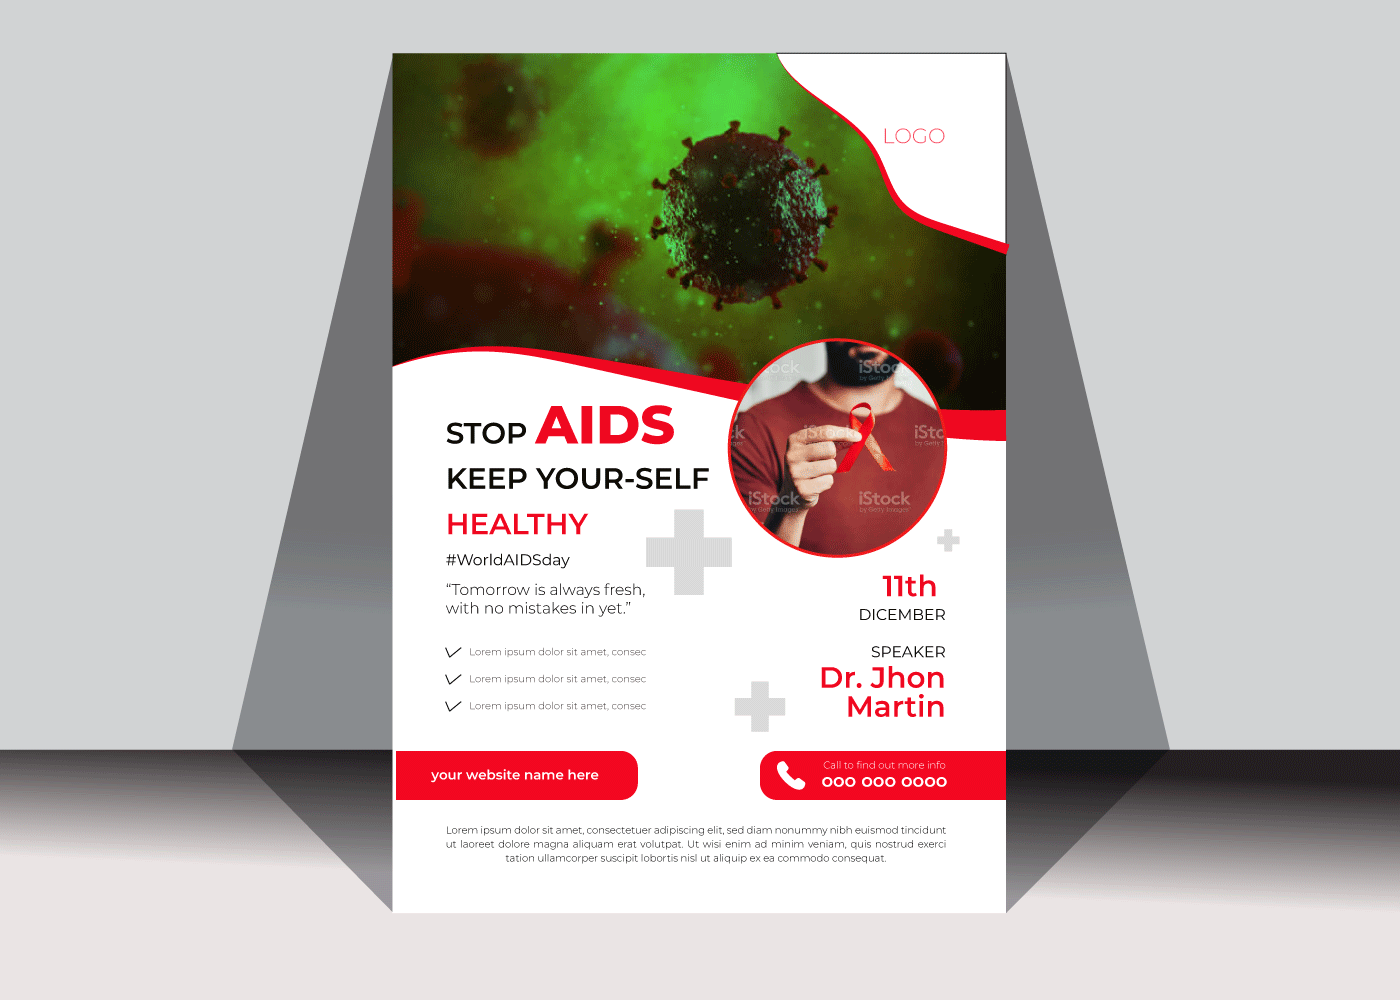 AIDS awareness campaign marketing   Advertising  medical Health doctor hiv STOP AIDS